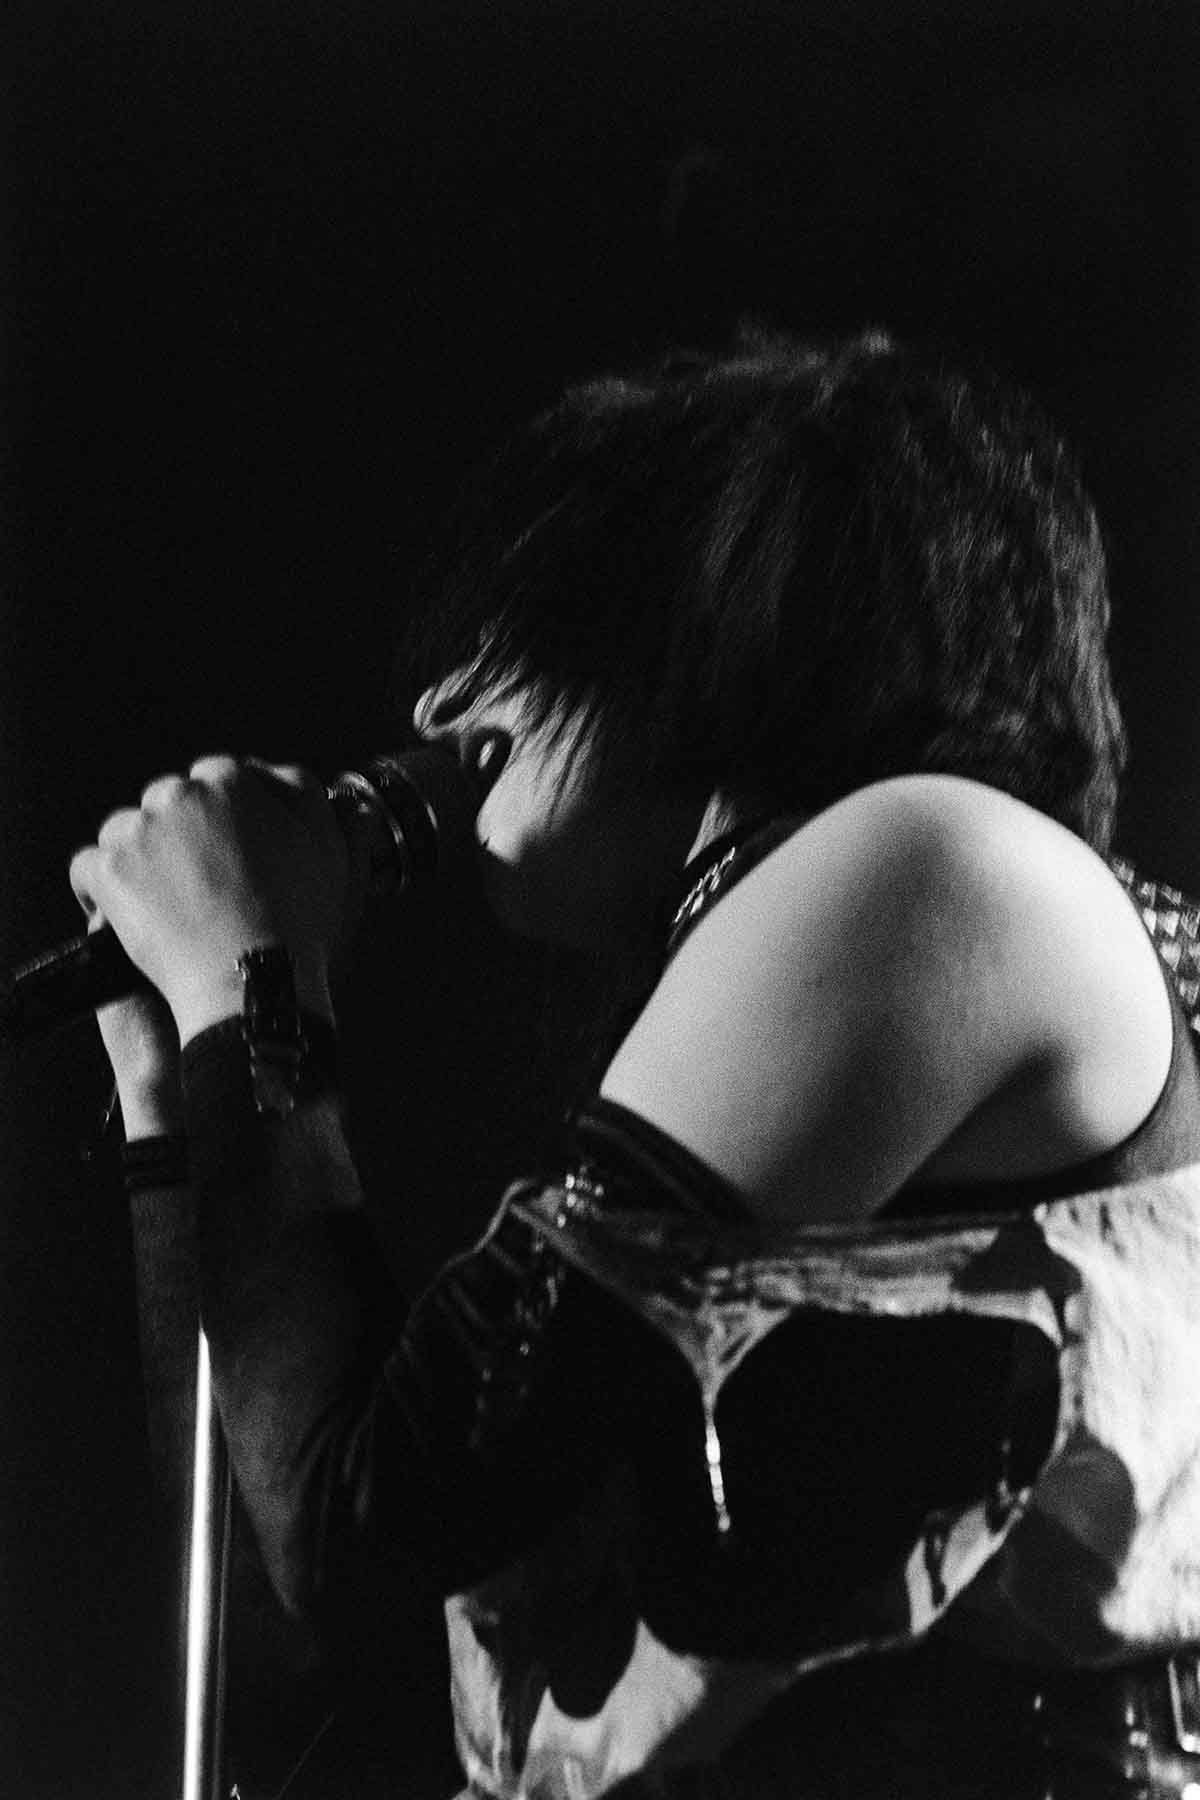 Live photos of experimental New Wave, Noise, Post-Punk, Industrial en Avantgarde bands inge-bekkers-photography-siouxsie-and-the-banshees-pandora-music-box-1983-live-alternative-bands-0341-fotografie